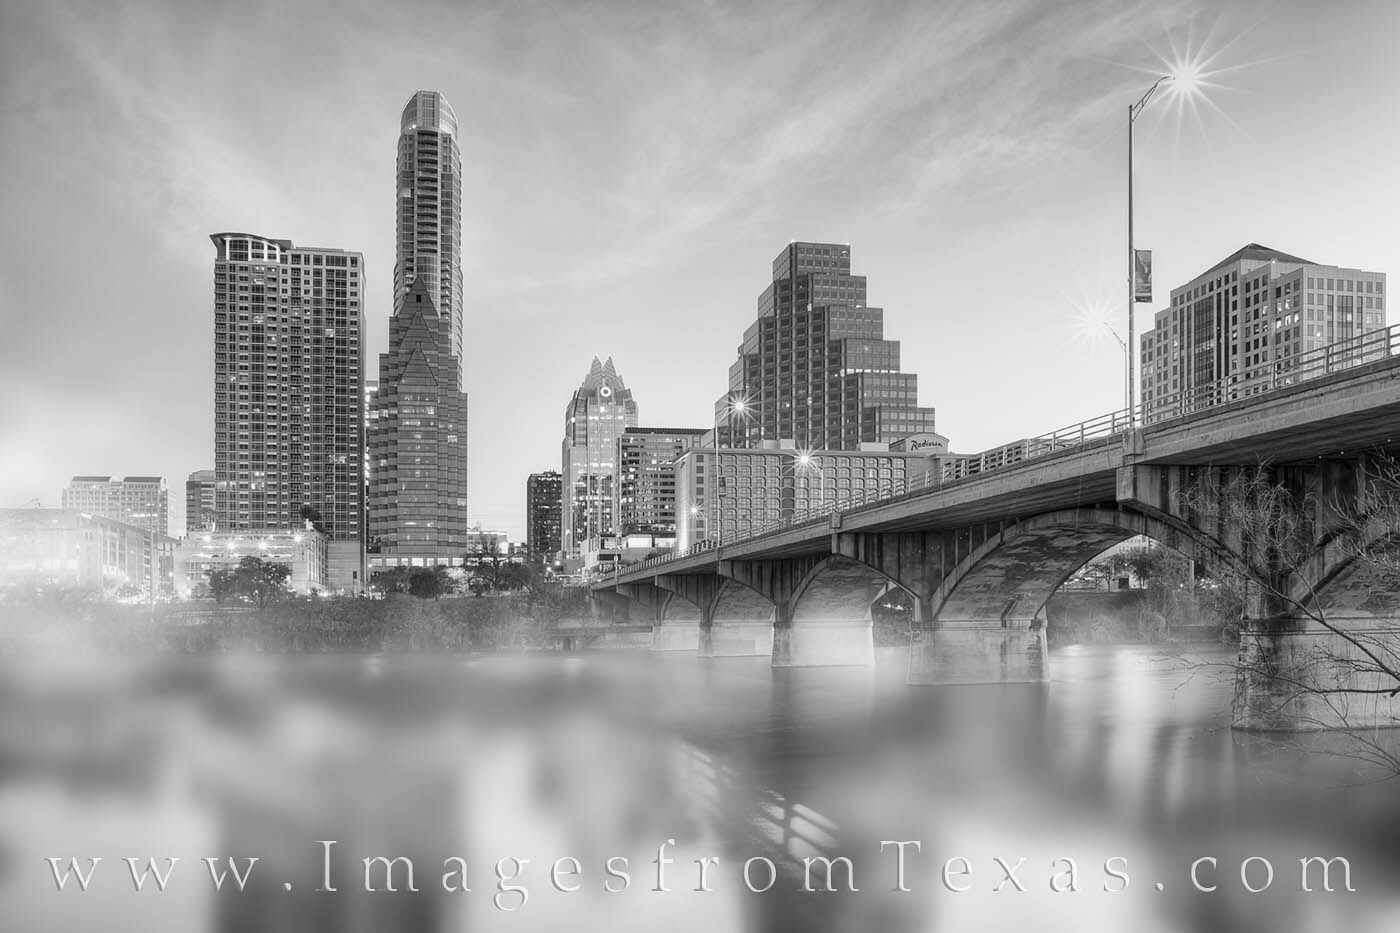 Surrounded by scrub, I wiggled my way through the brush and captured a few images of fog coming off Lady Bird Lake with the downtown...